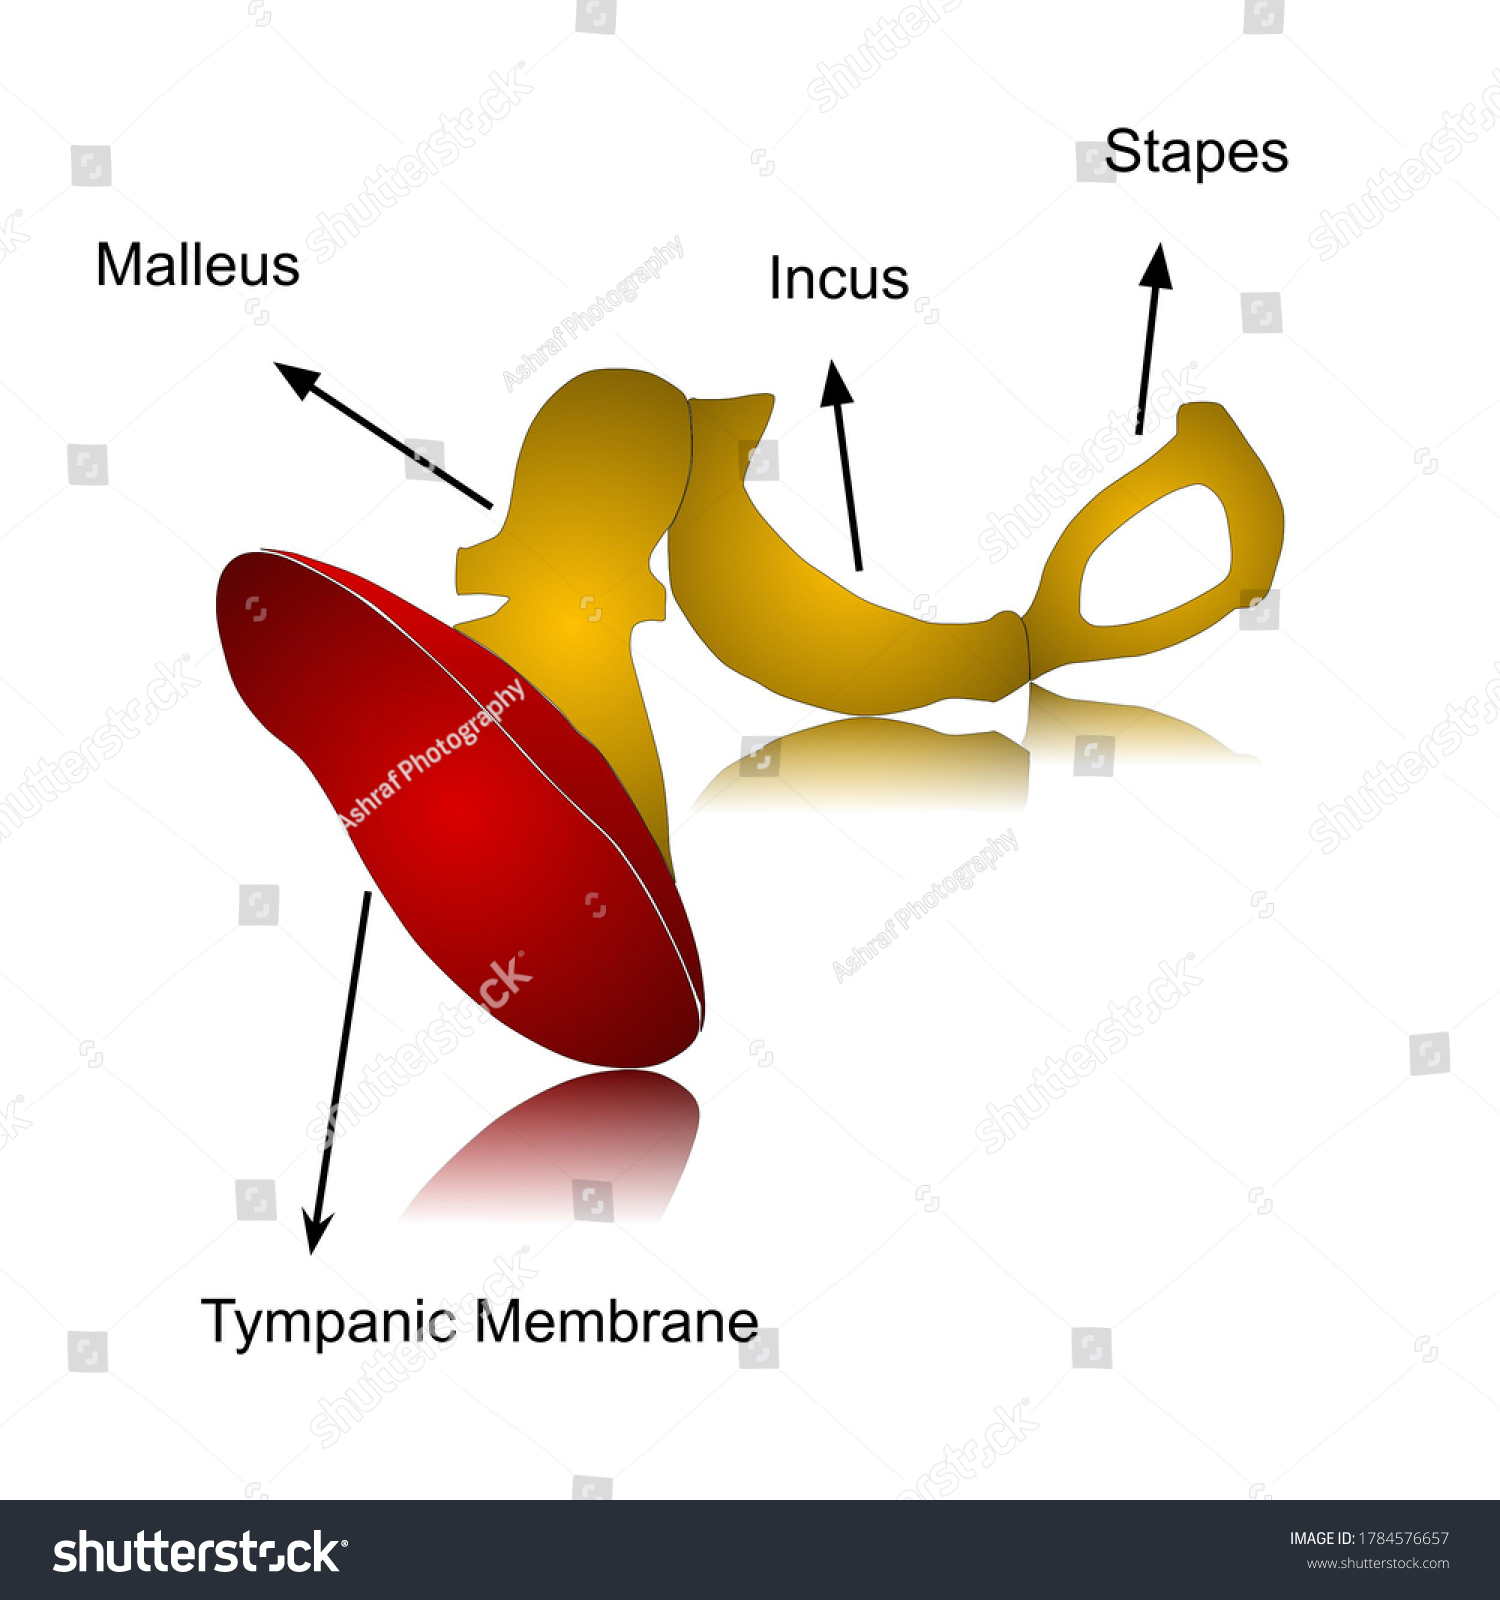 Auditory Ossicle Images Stock Photos Vectors Shutterstock